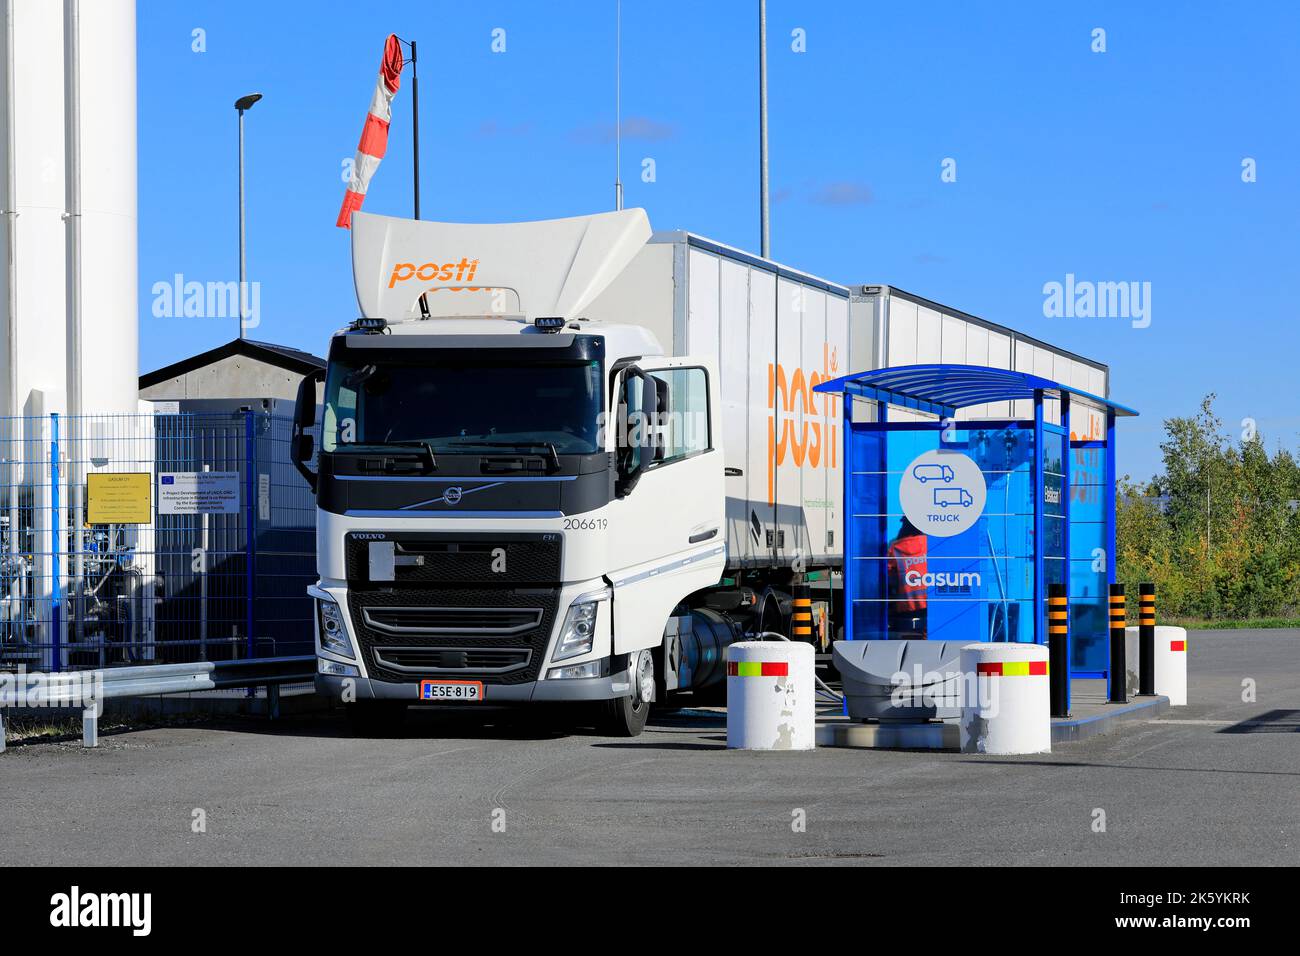 Gas-powered Volvo FH freight truck of Posti Group Oyj at Gasum LNG and LBG gas filling station for heavy transport in Lieto, Finland. Sept 22, 2022. Stock Photo